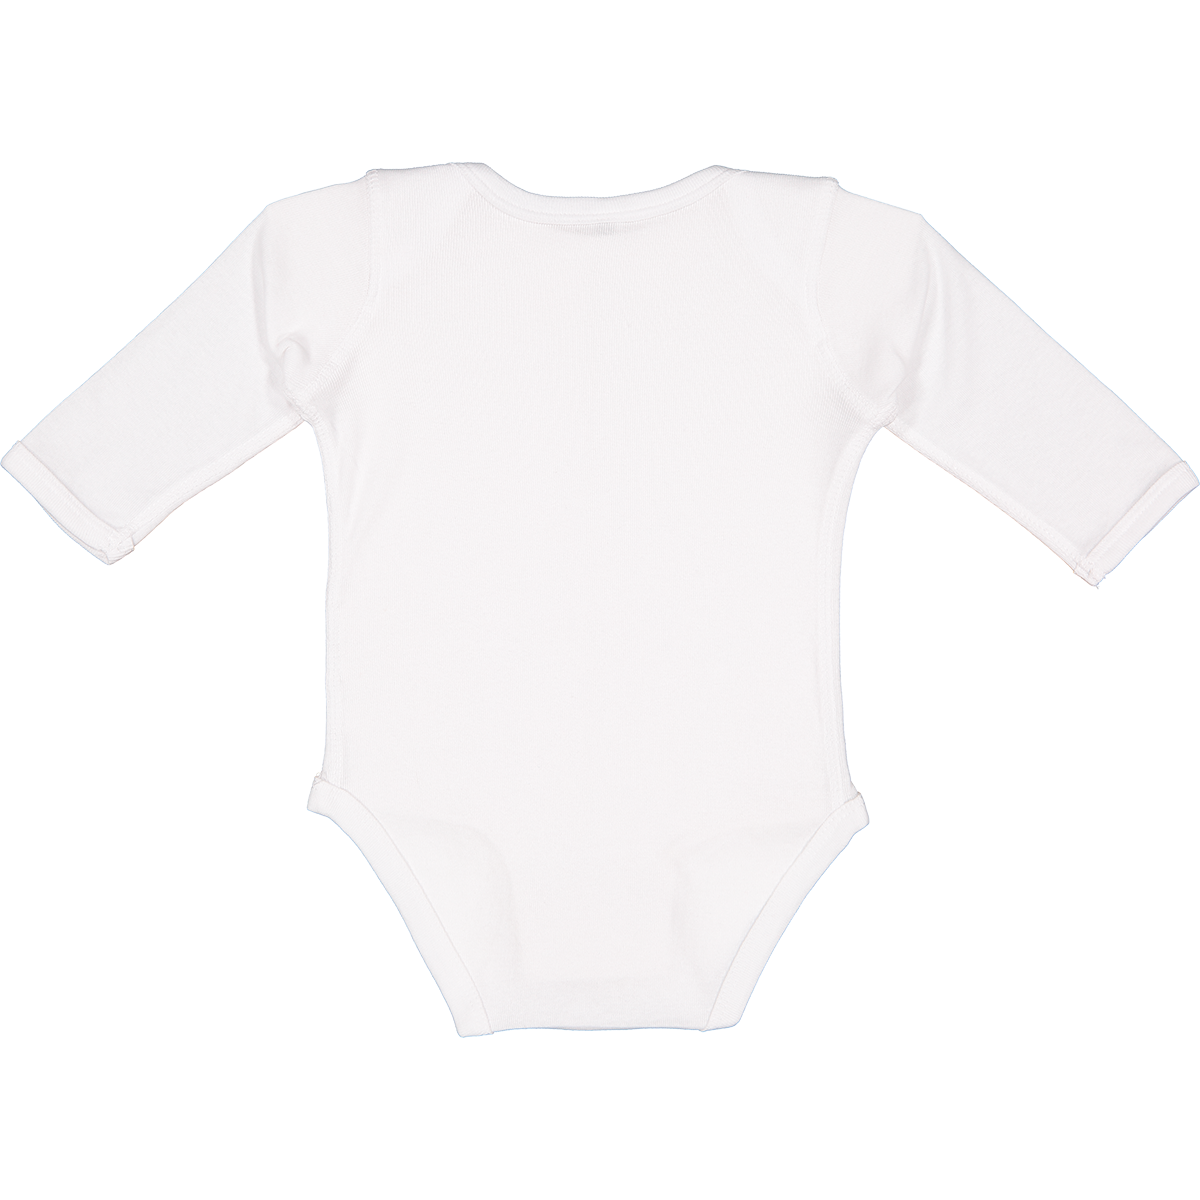 Inktastic Im Not Just Daddys Little Im a Truckers Daughter Girls Long Sleeve Baby Bodysuit - image 4 of 4